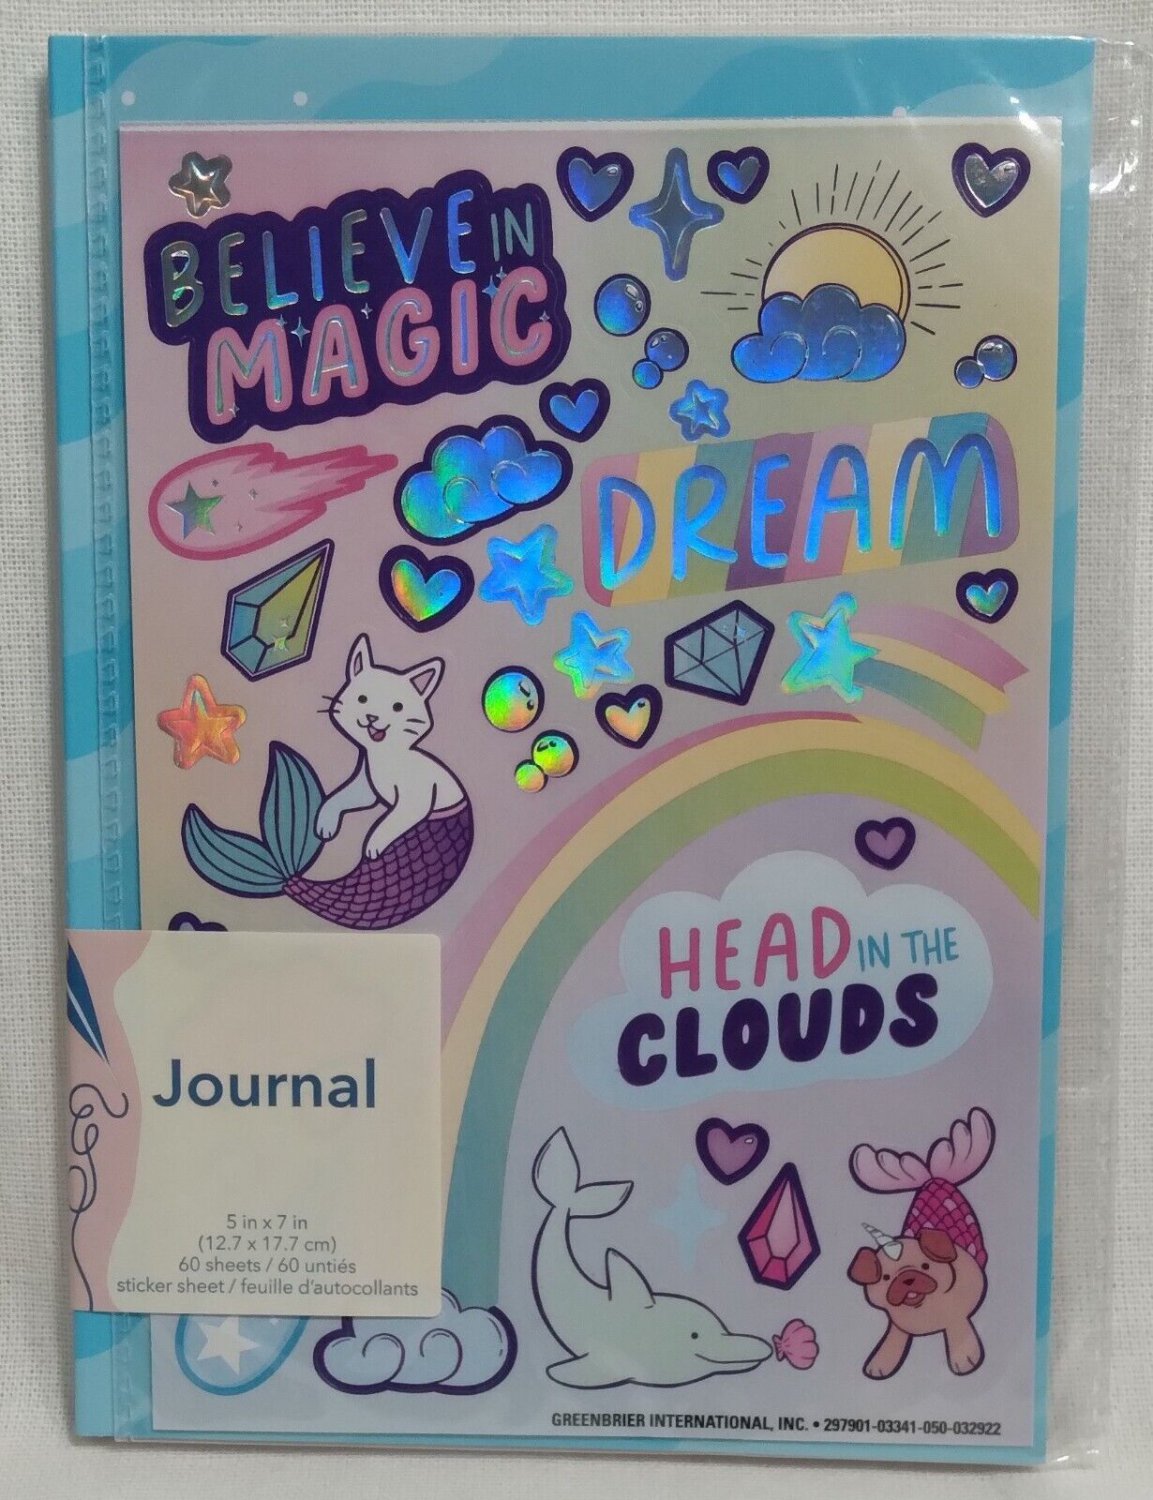 Blue Journal Notebook Notepad Believe in Magic Stickers 60 Sheets Wide Ruled 5x7